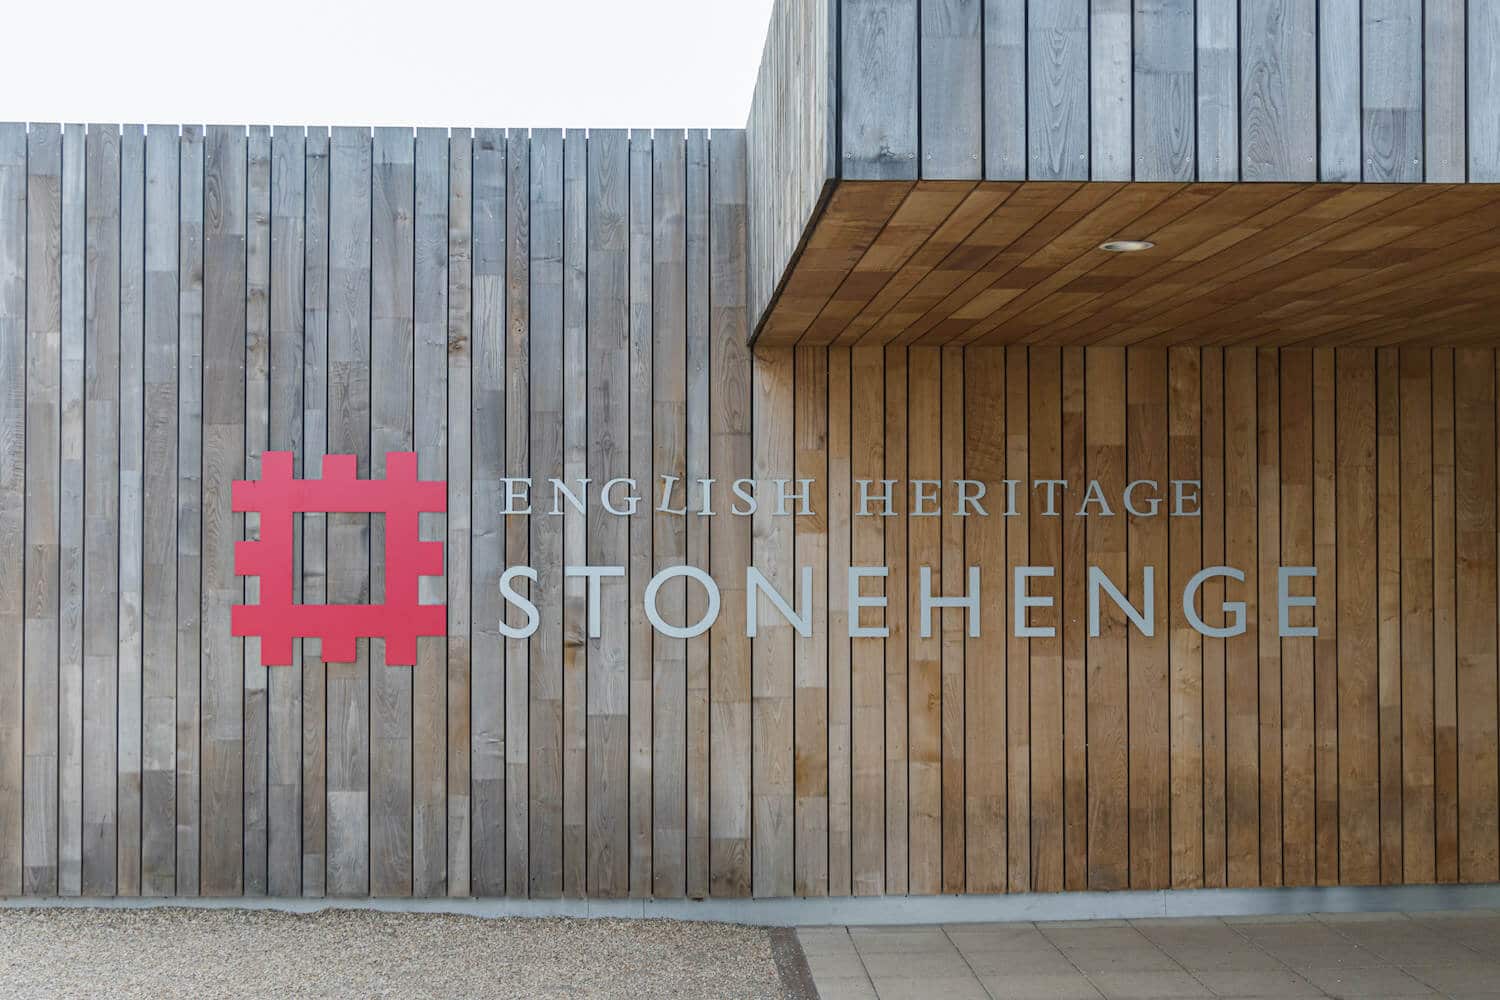 Visitors centre at Stonehenge in England.